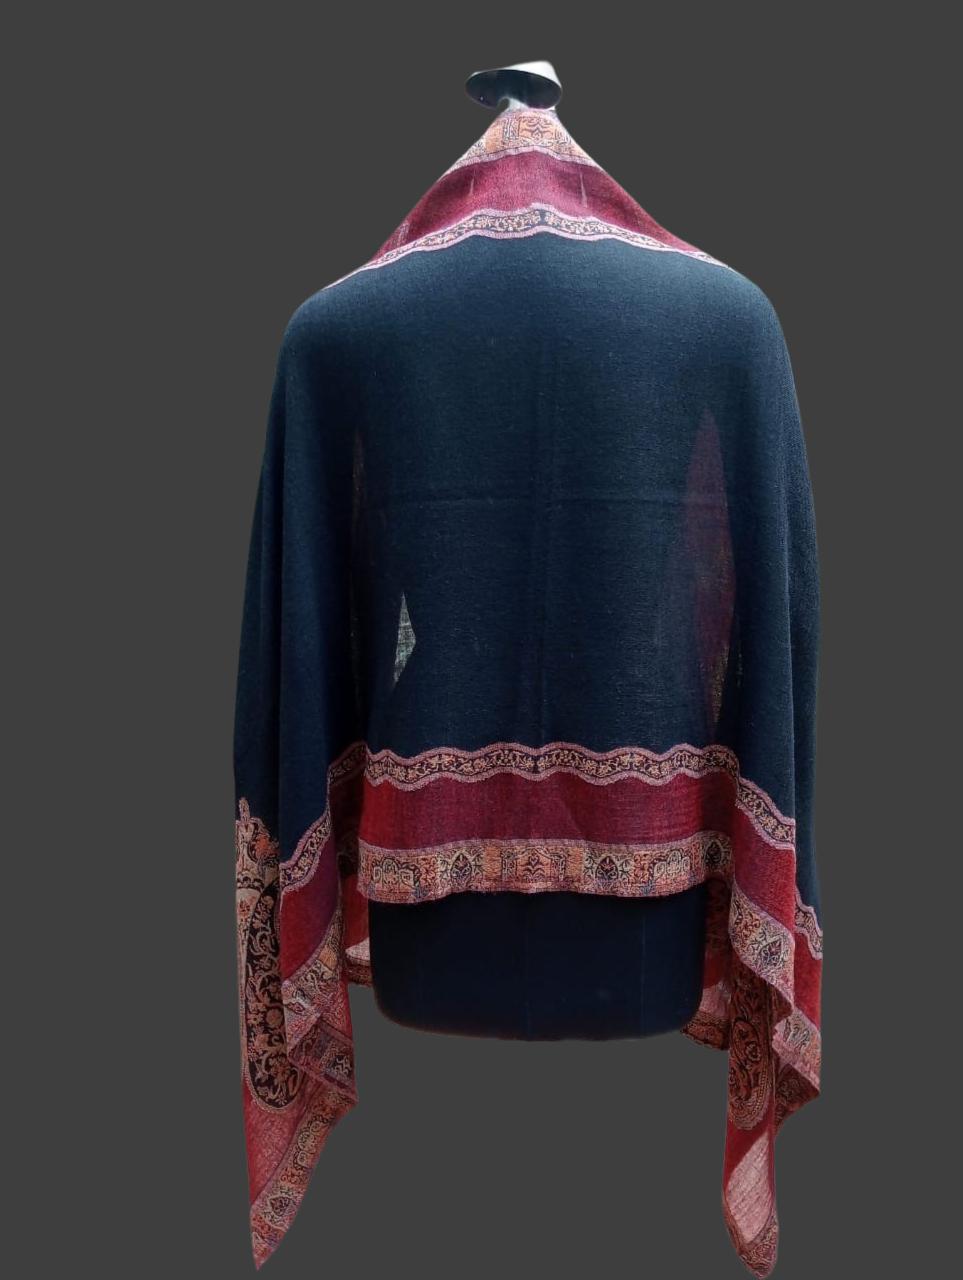 Fine wool stole with woven jamawar border